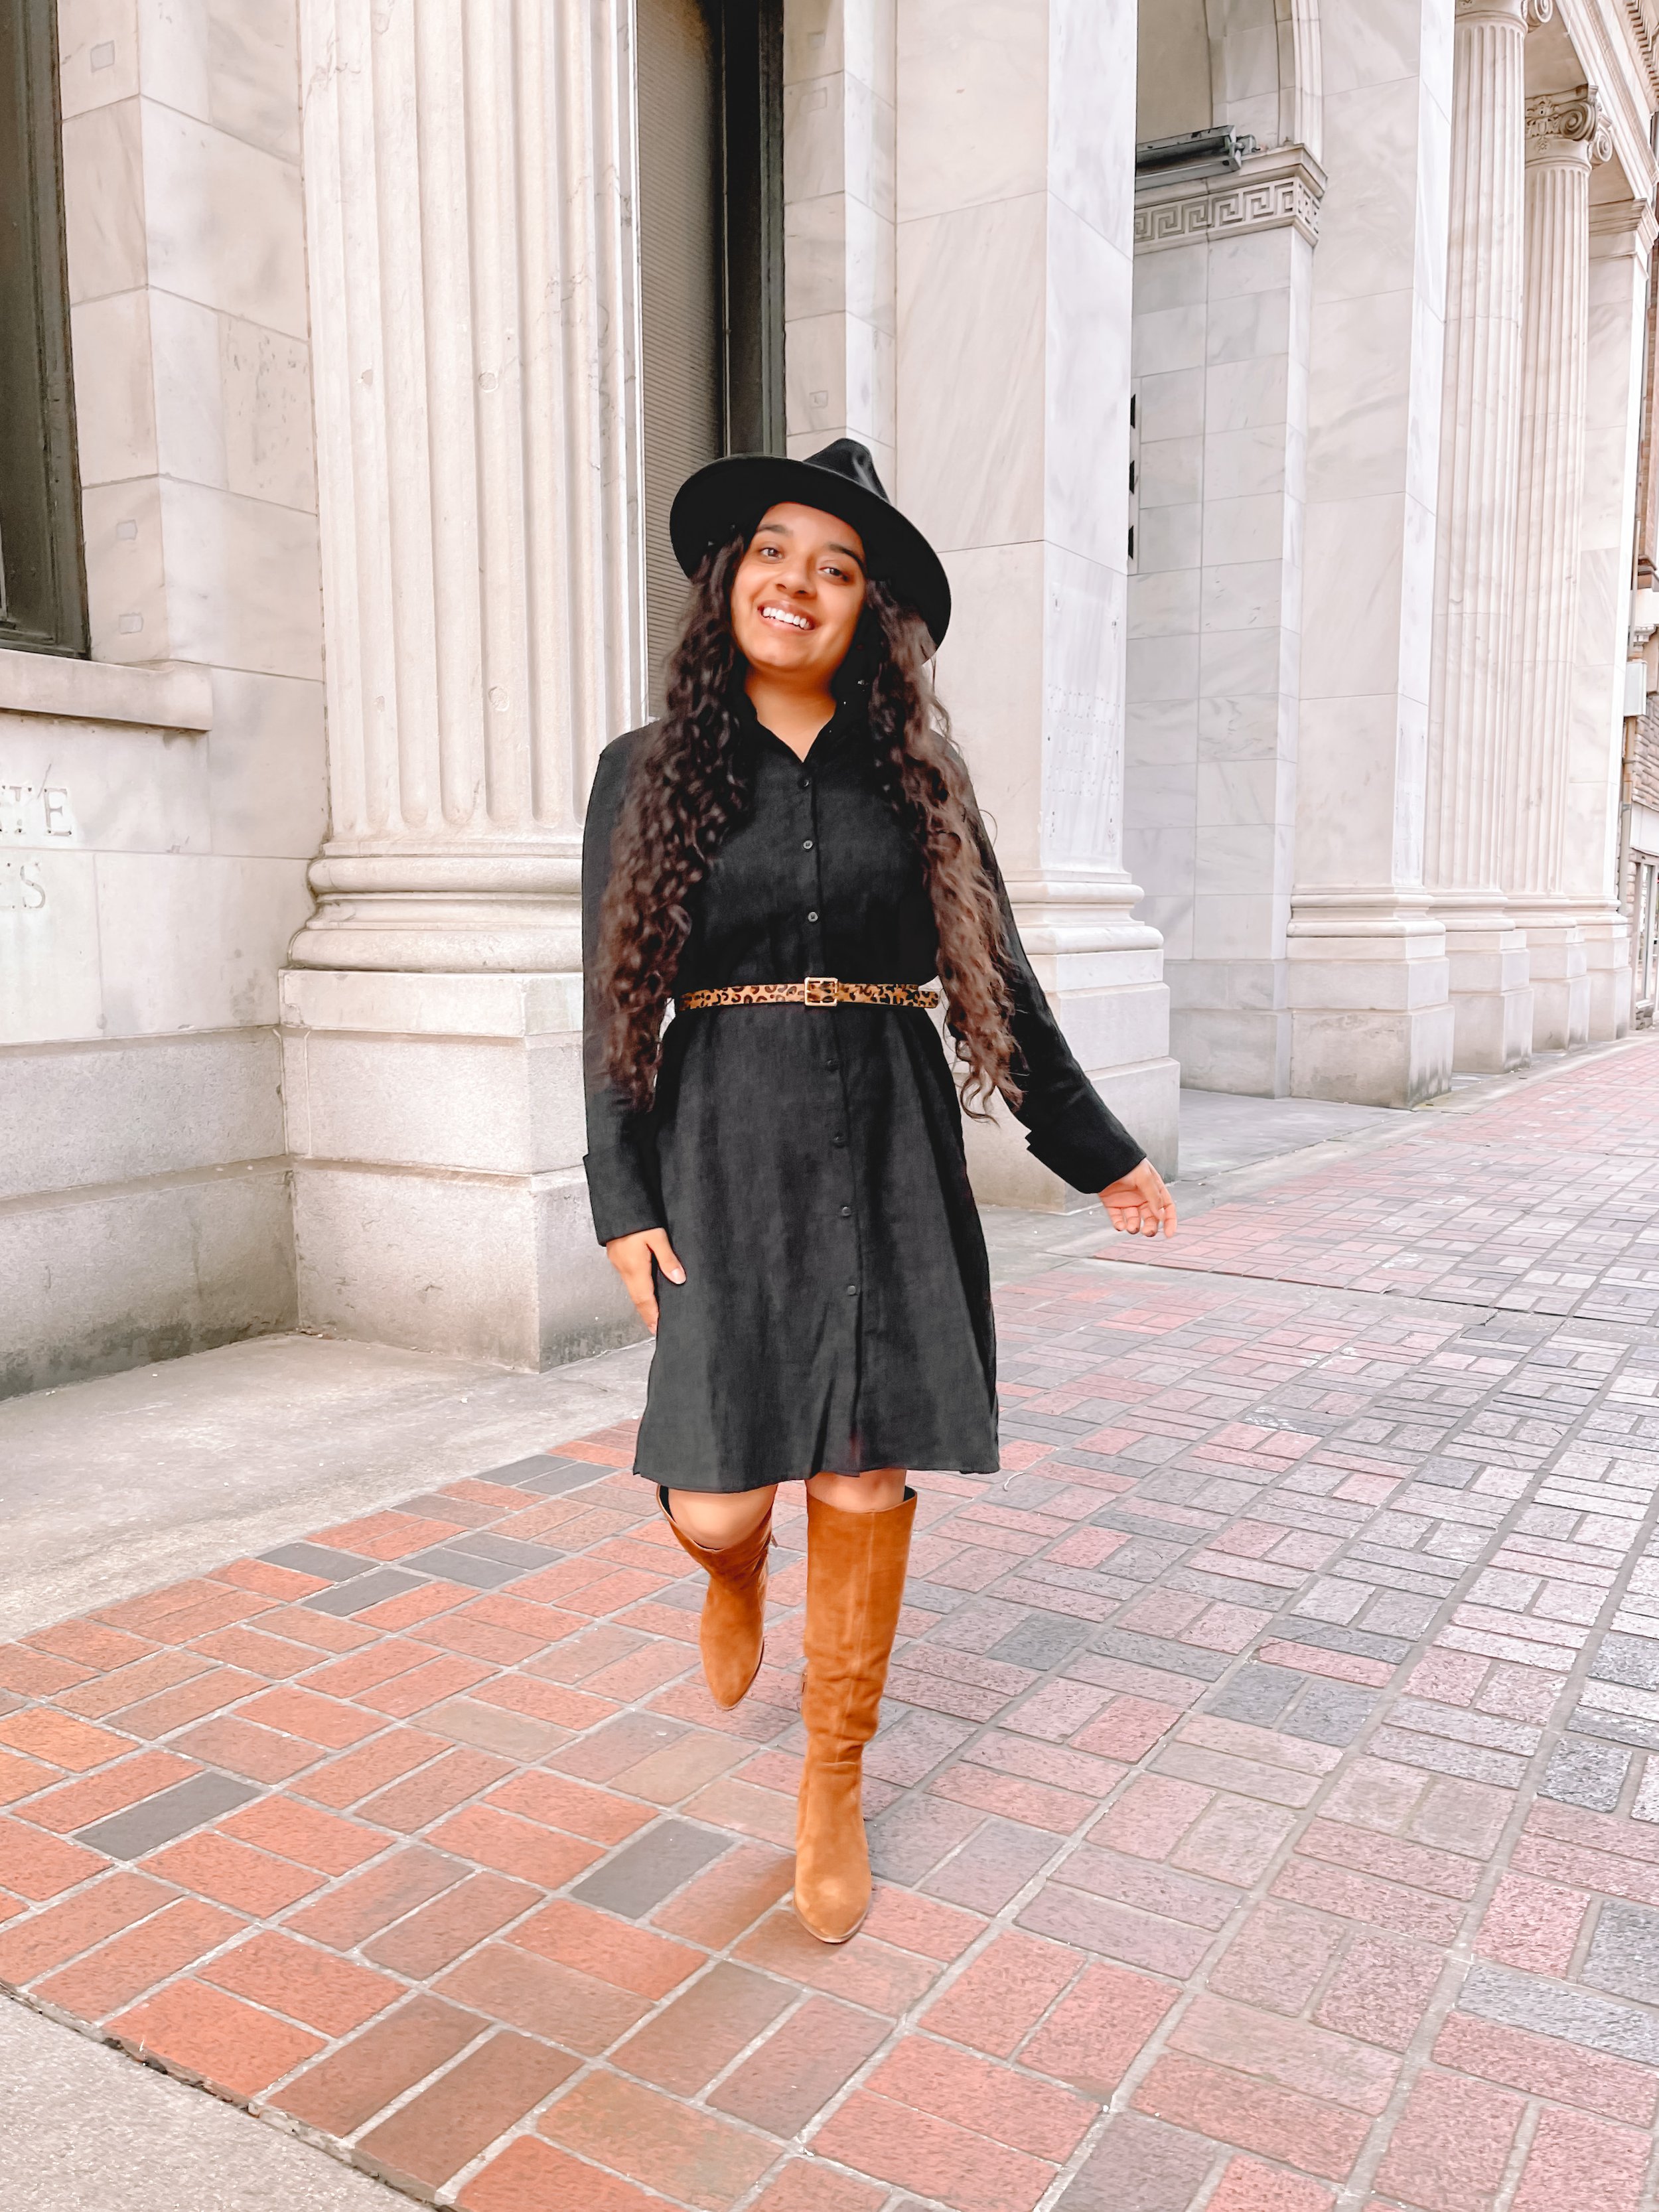 First Day Of Fall Is Here! — Yesenia Sanchez